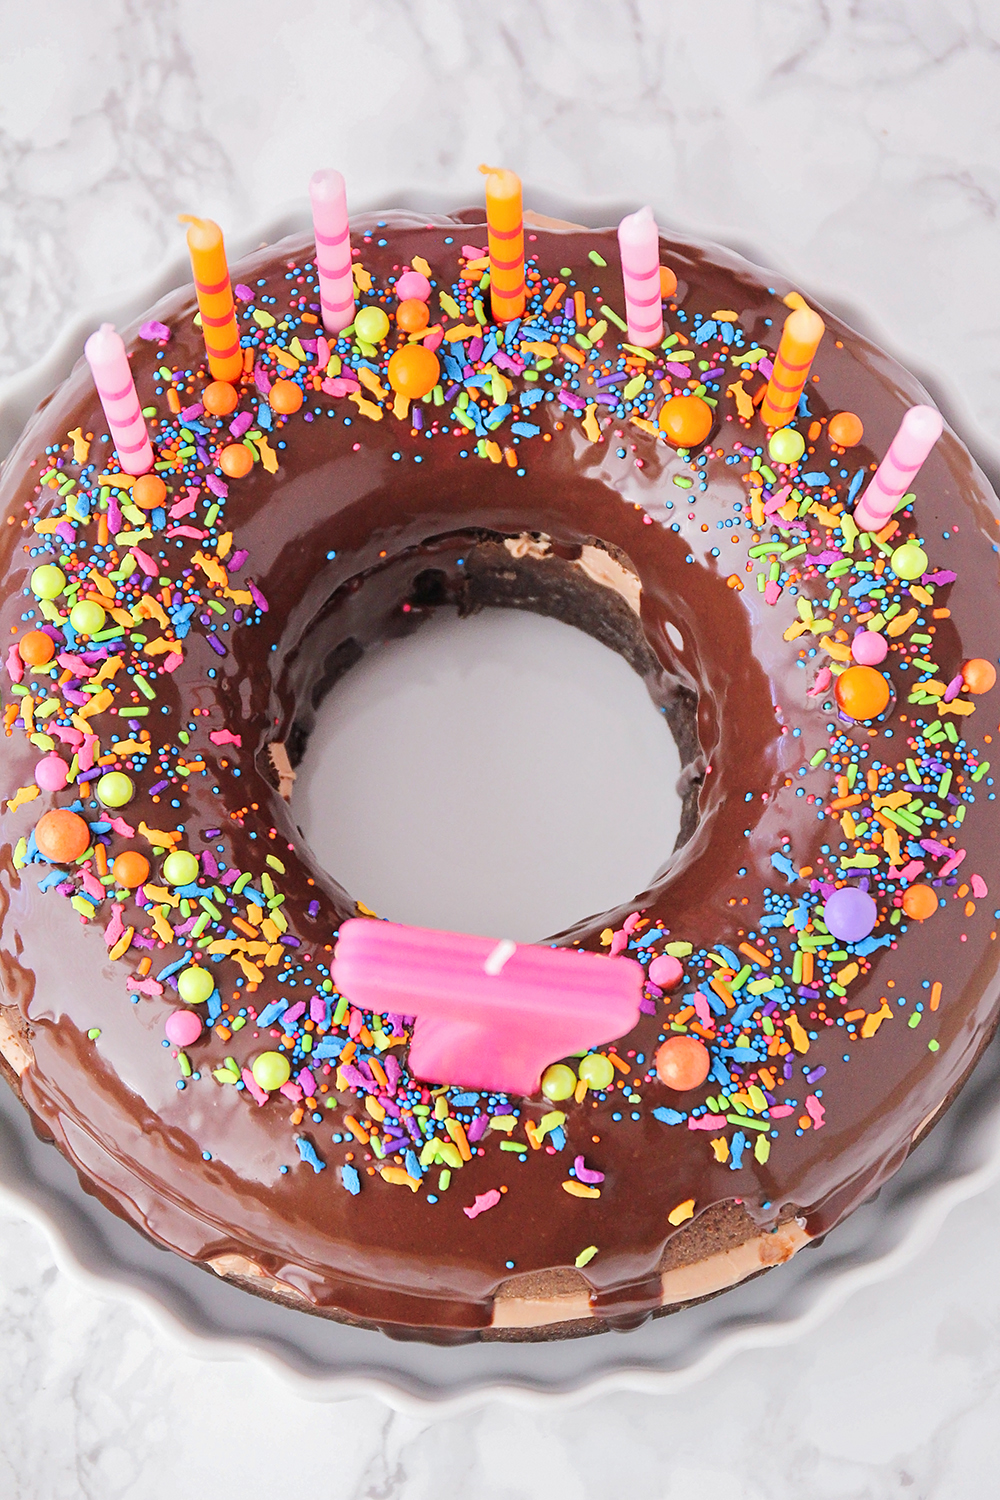 This fun and whimsical chocolate donut birthday cake is so delicious and indulgent!